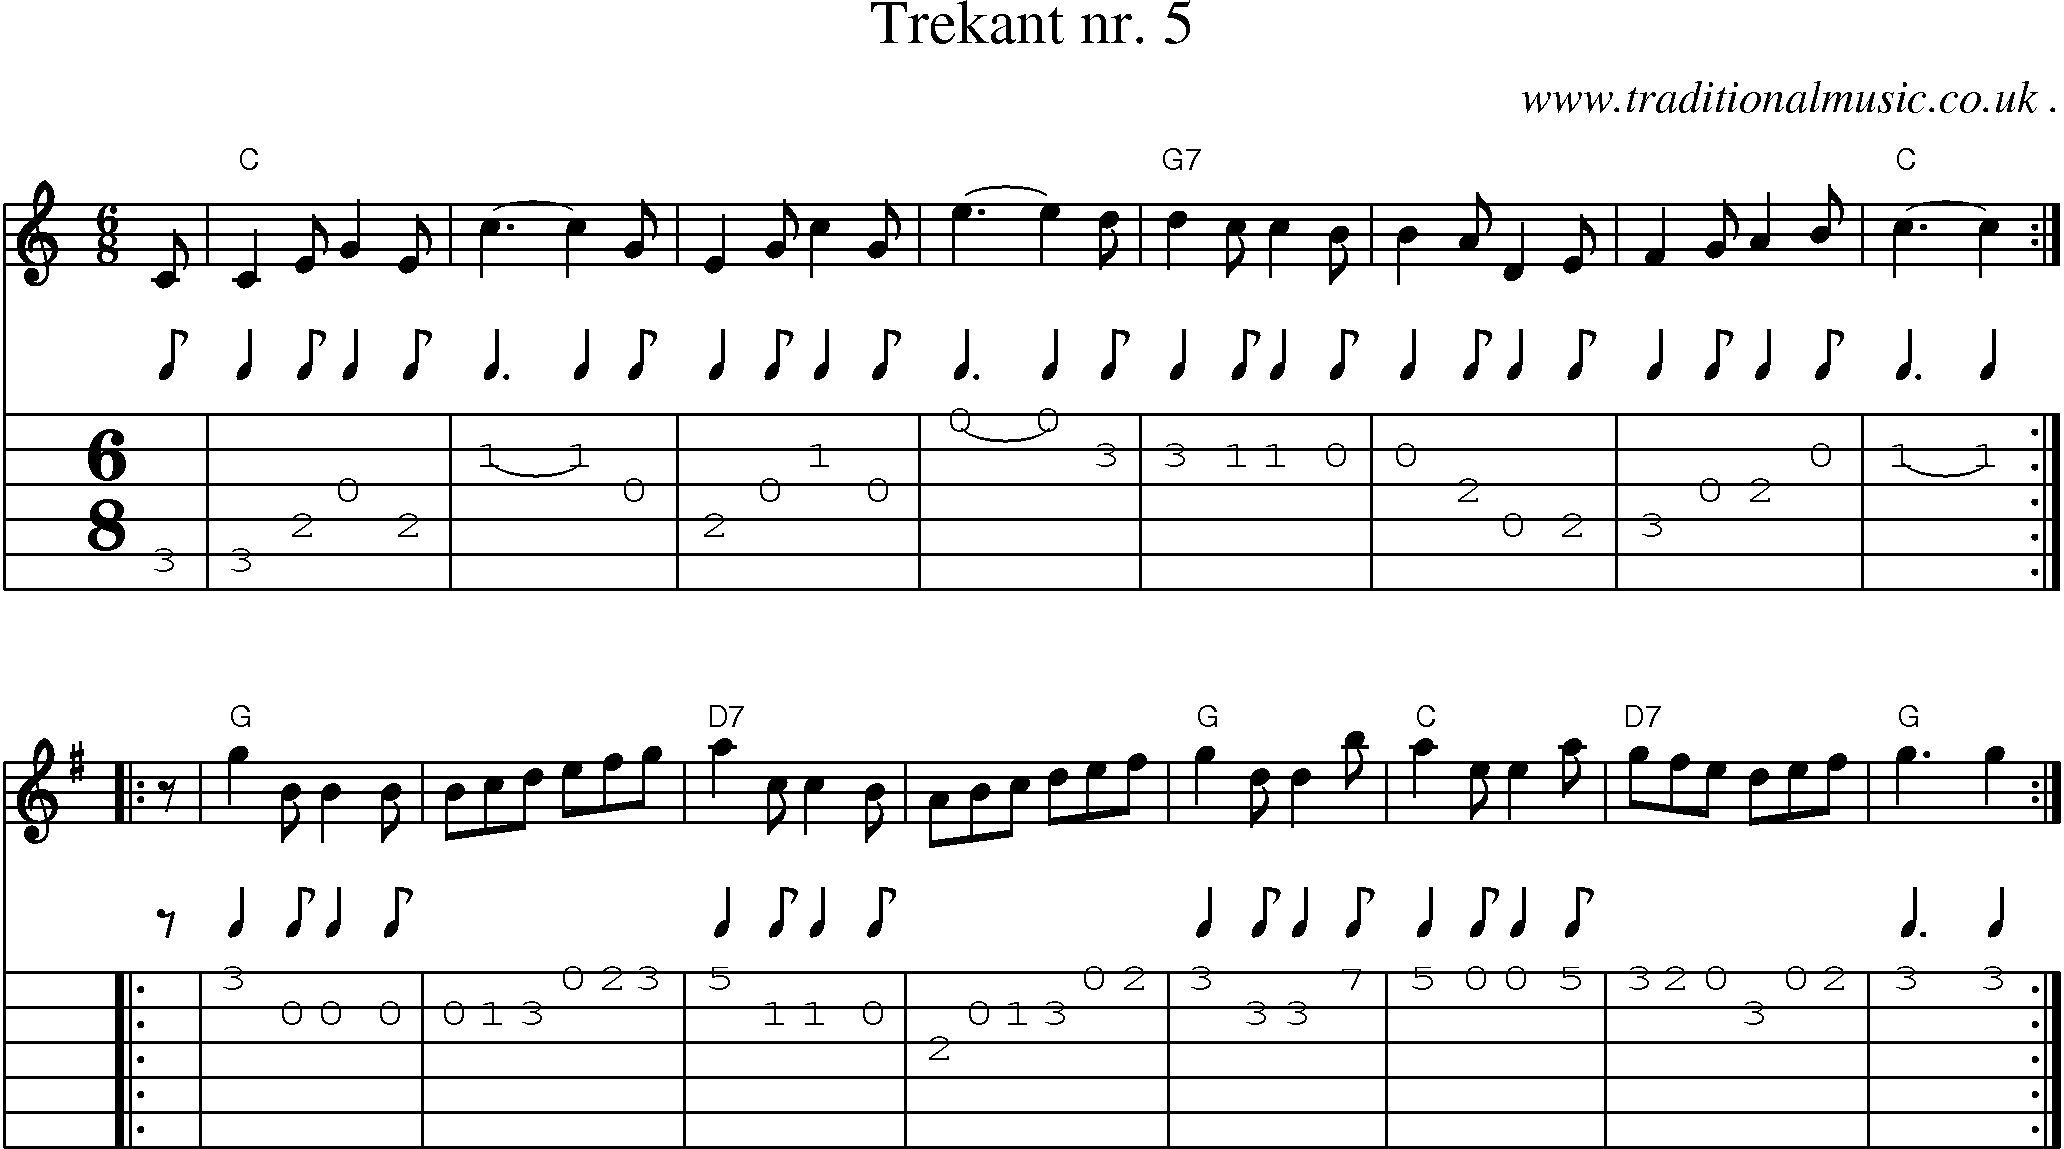 Sheet-music  score, Chords and Guitar Tabs for Trekant Nr 5